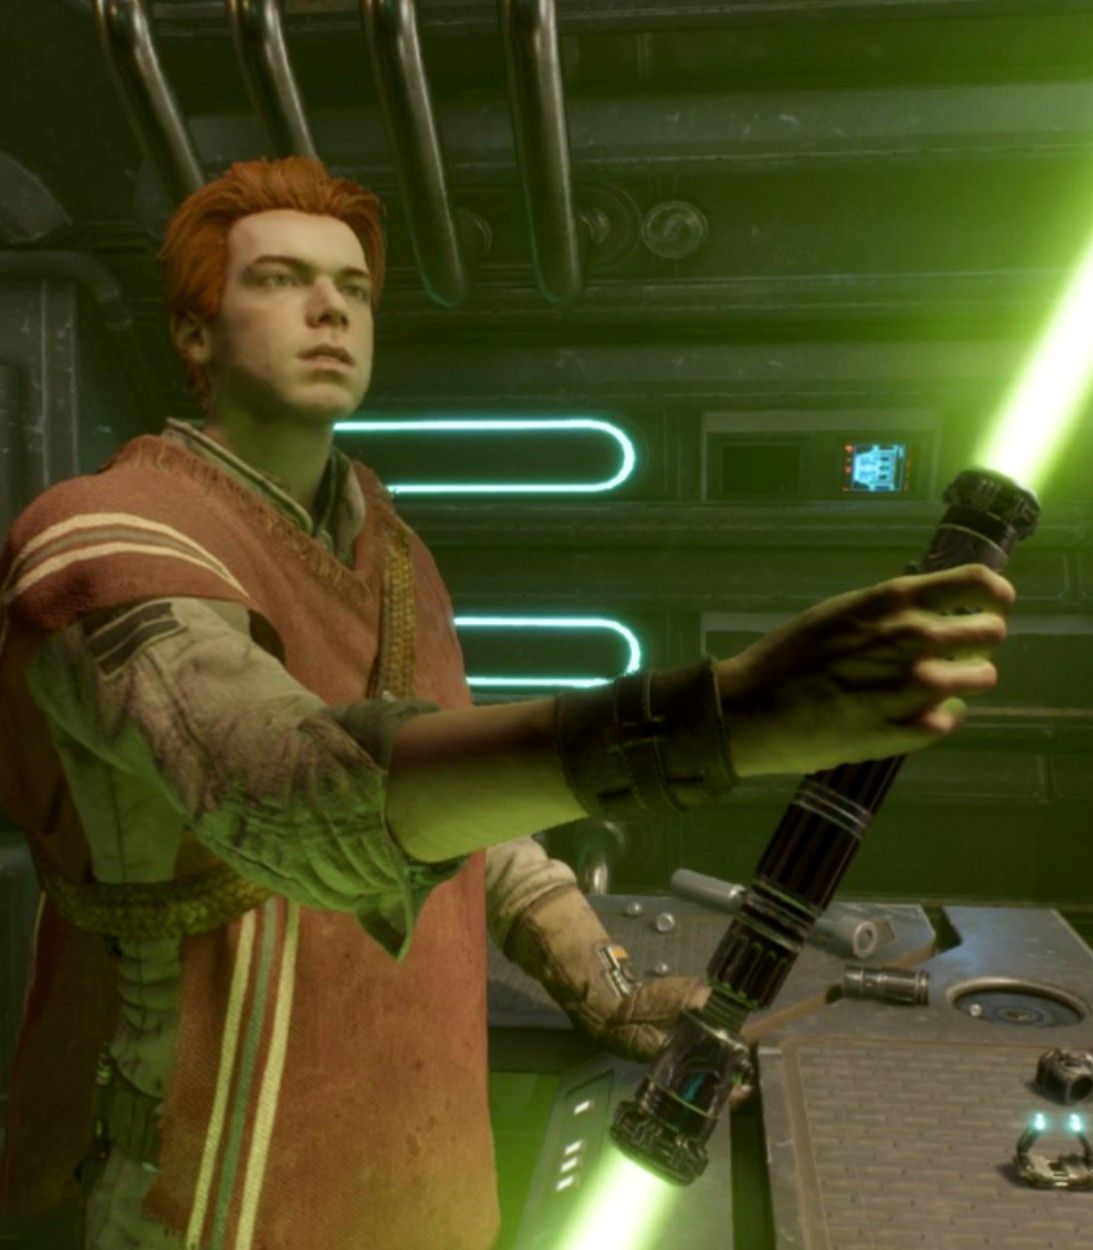 Cal uses a double-bladed lightsaber in Star Wars Jedi: Fallen Order